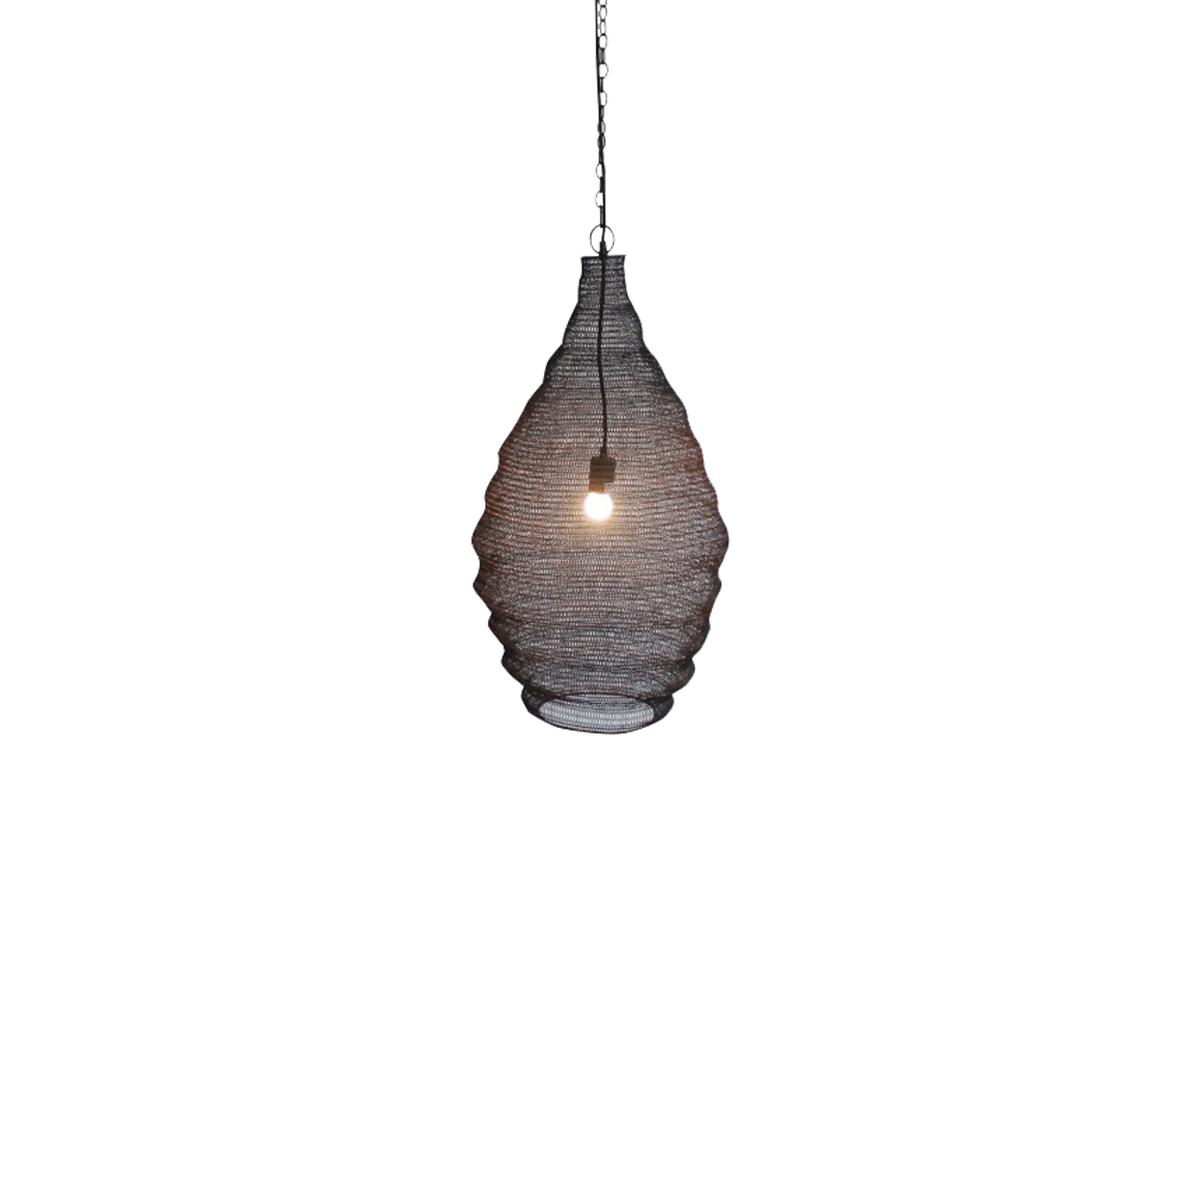 With its boho-chic vibe, the Basket Pendant Light provides an eye-catching element to any space.